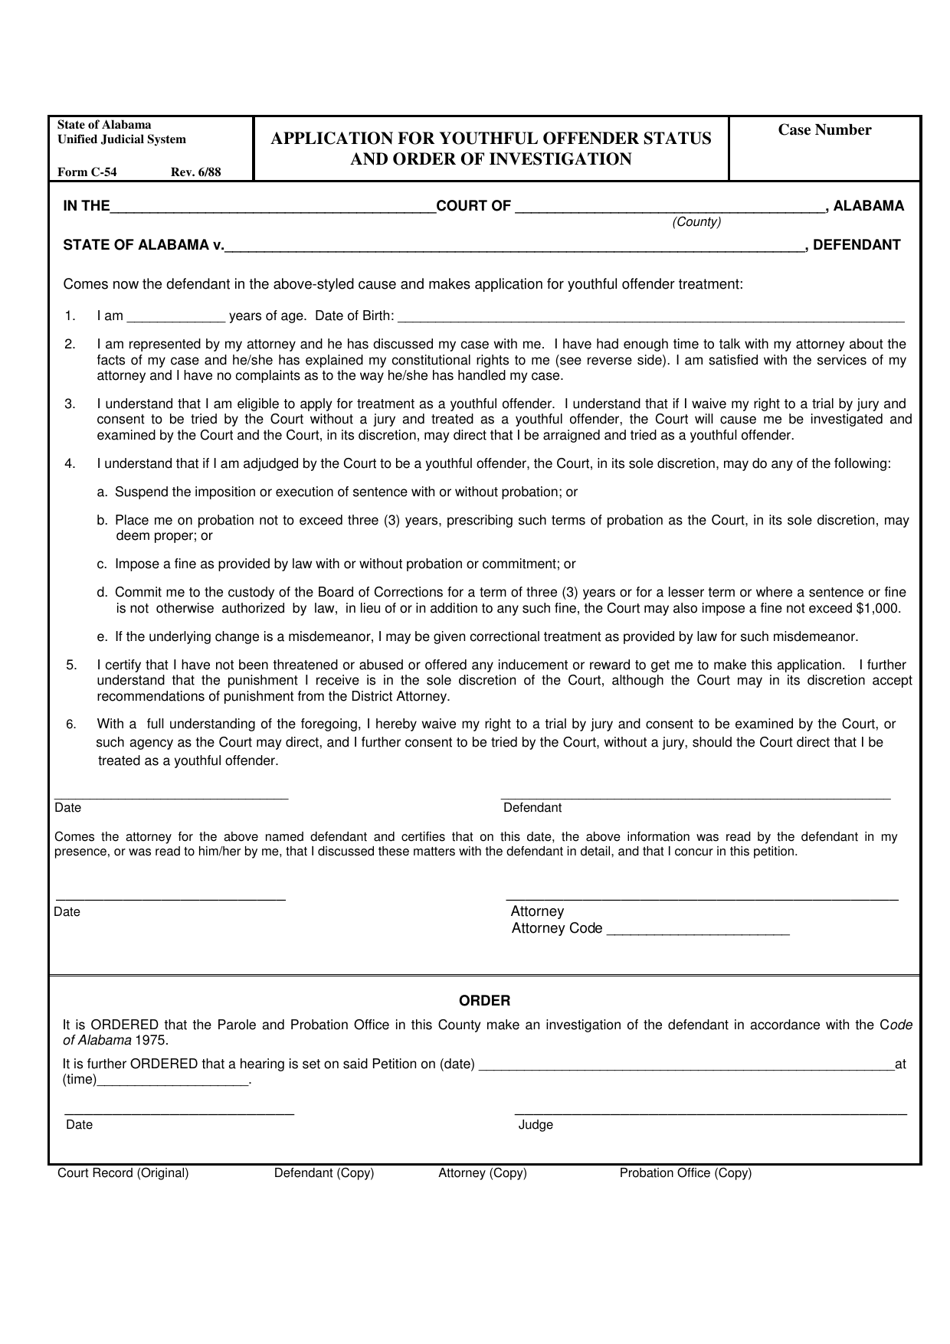 Form C-54 Application for Youthful Offender Status and Order of Investigation - Alabama, Page 1